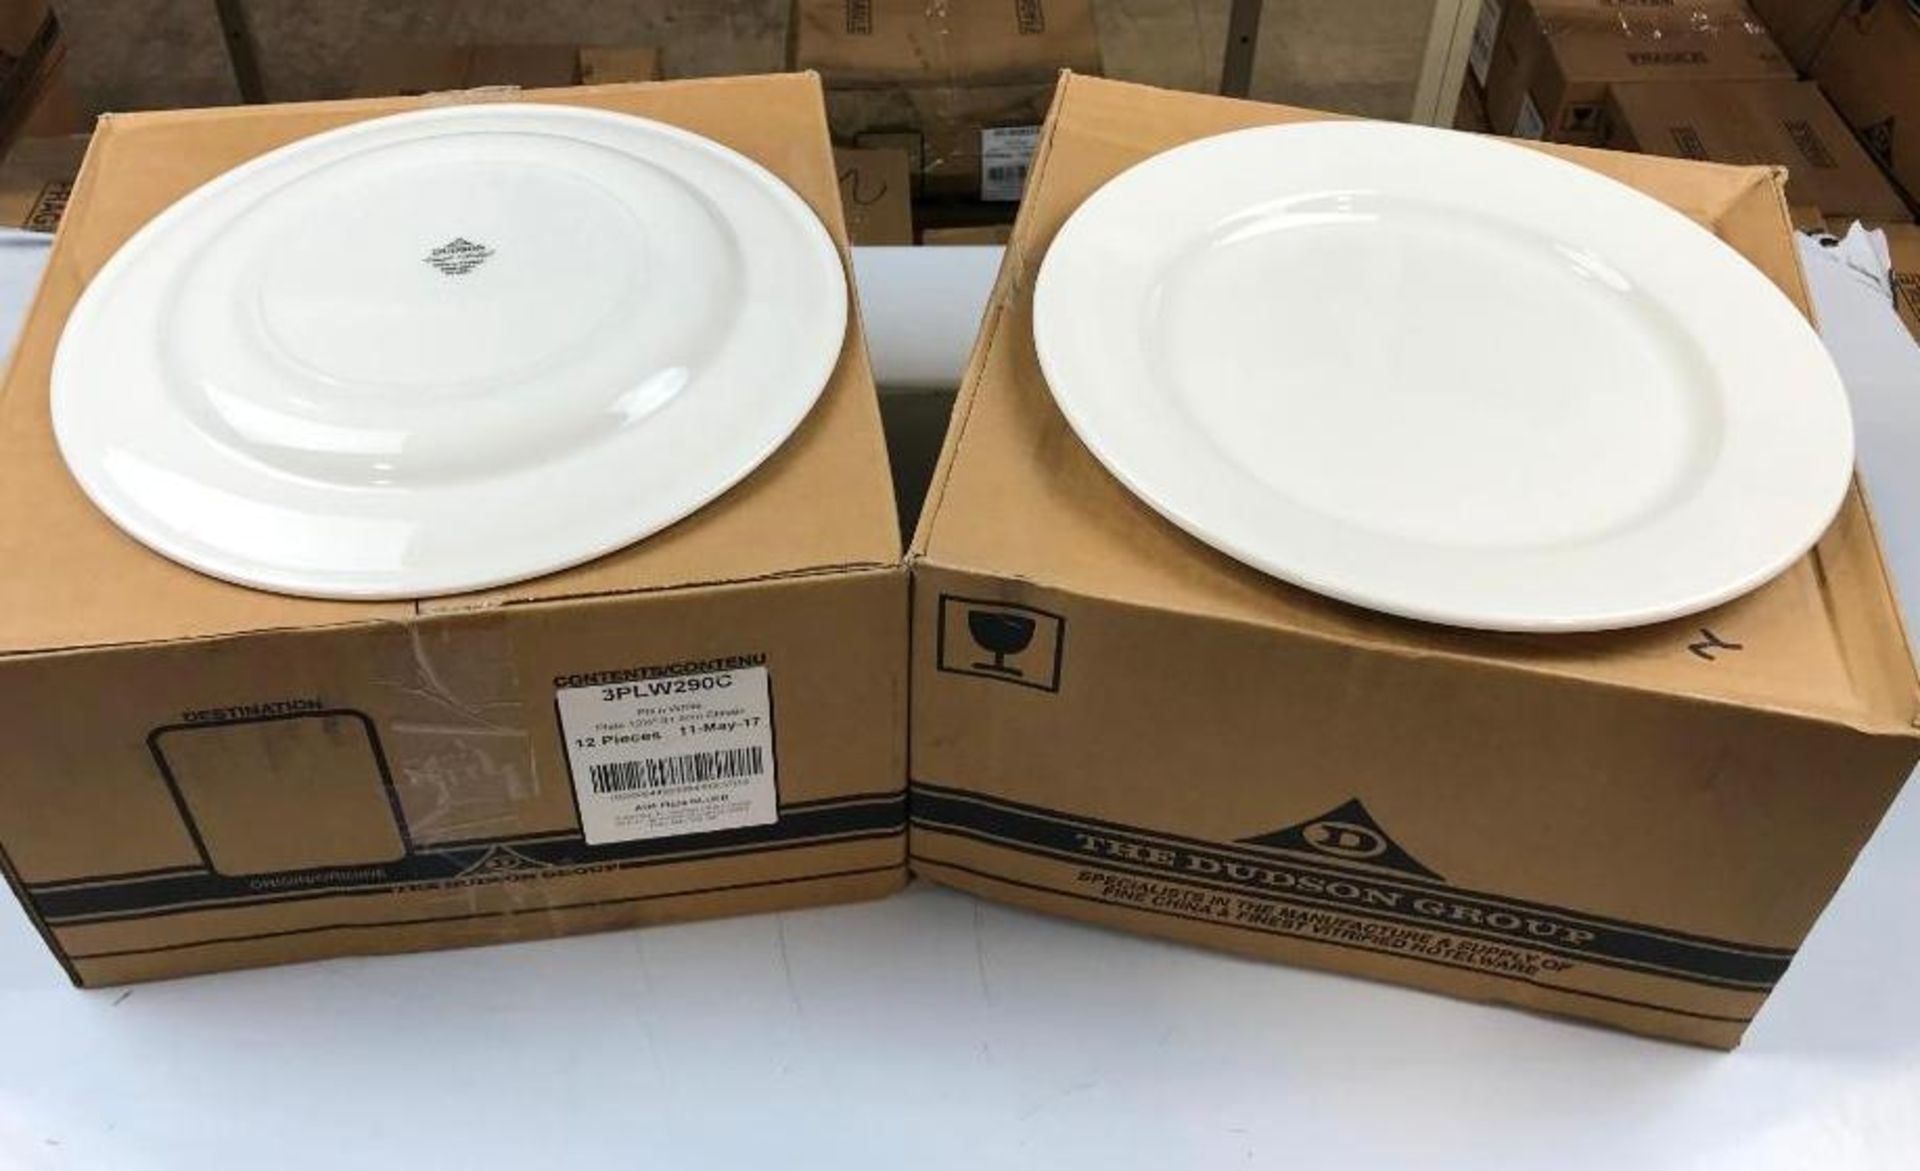 2 CASES OF DUDSON CLASSIC PLATE 12.5" - 12/CASE, MADE IN ENGLAND